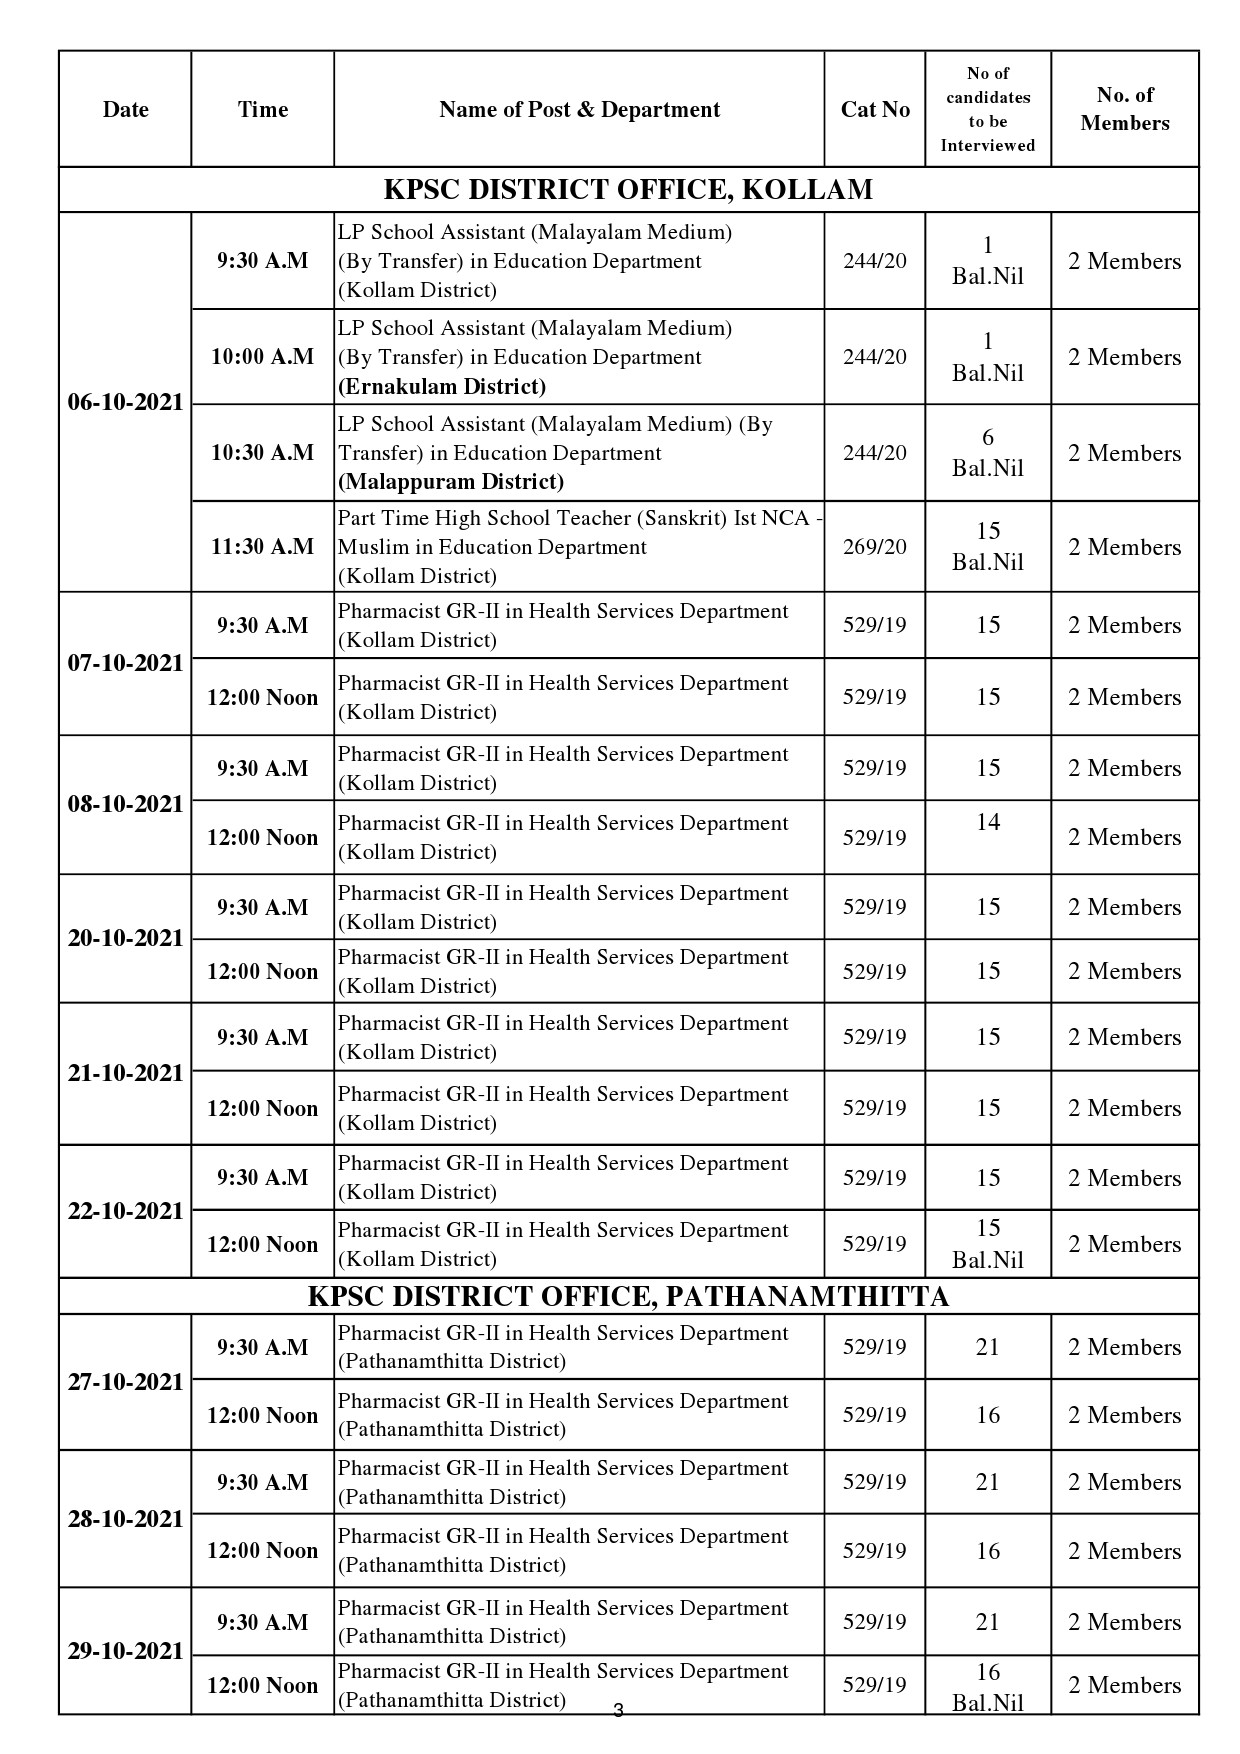 KPSC Interview Programme For The Month Of October 2021 - Notification Image 3